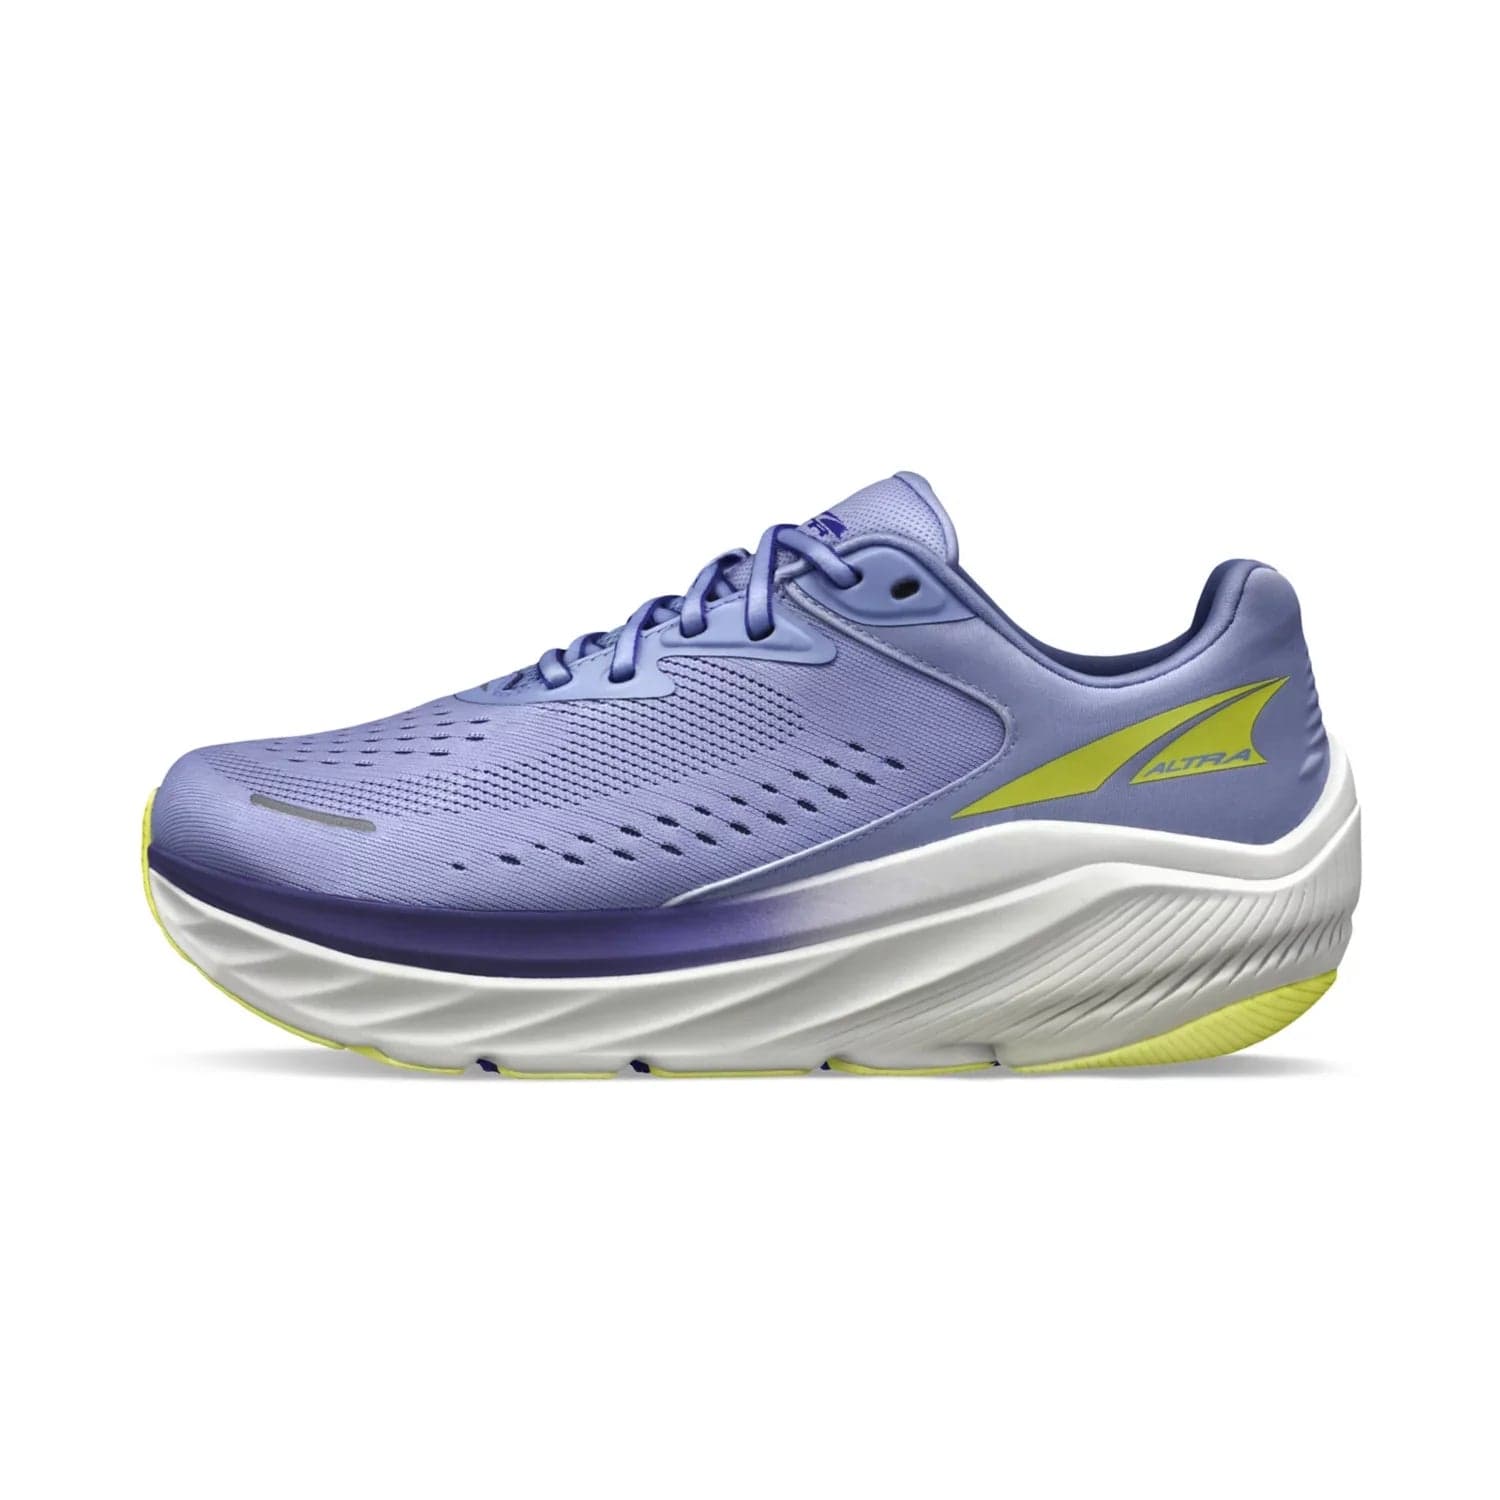 Altra Via Olympus 2 [Women's] Shoes - Blister Prevention